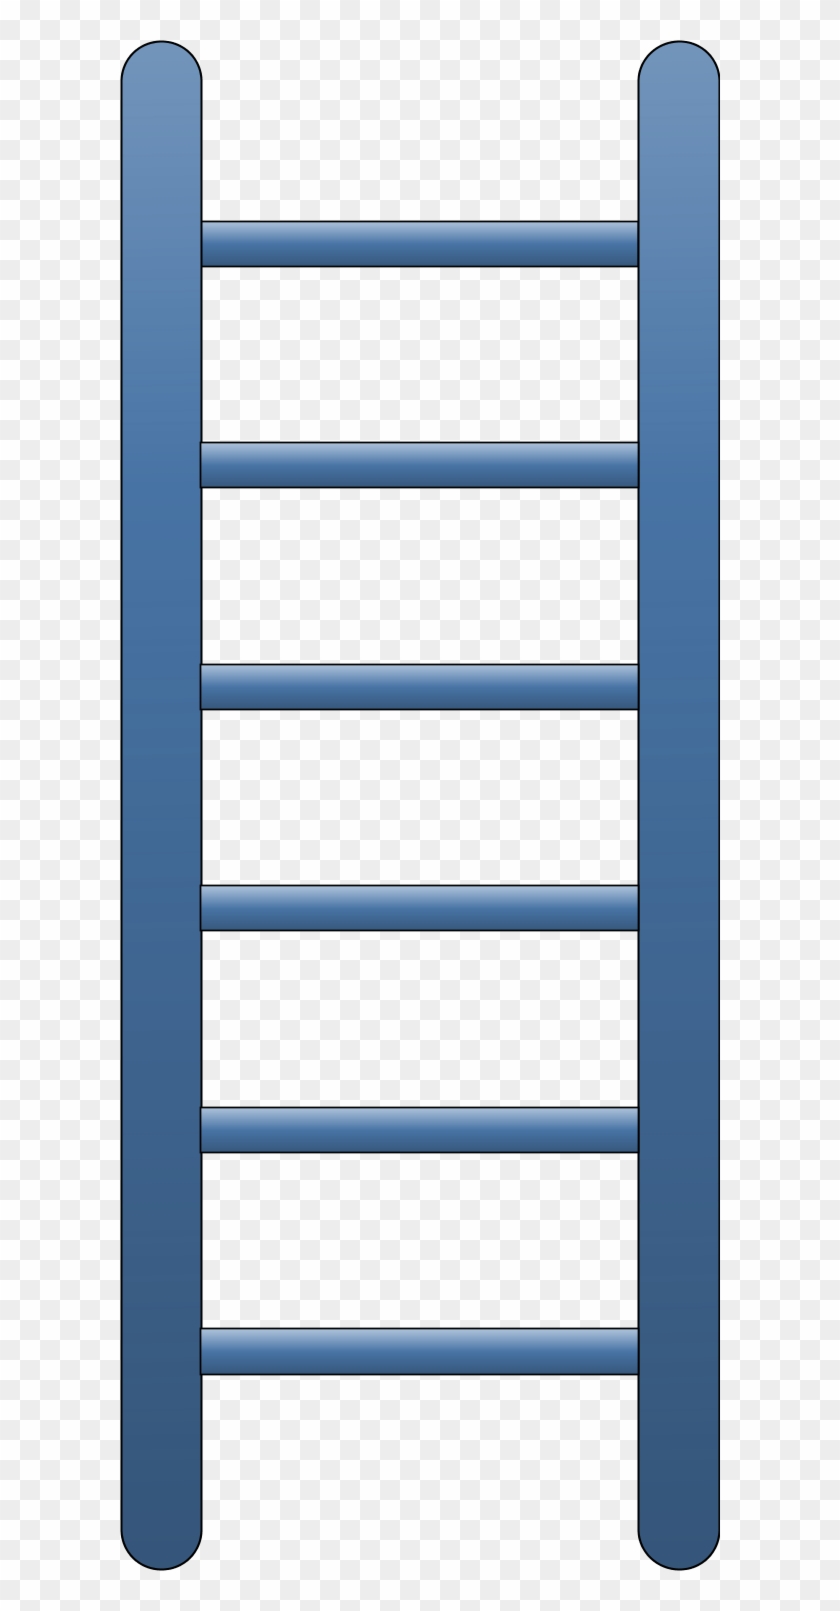 Colouful Clipart Ladder - Ladders Clipart #1076774